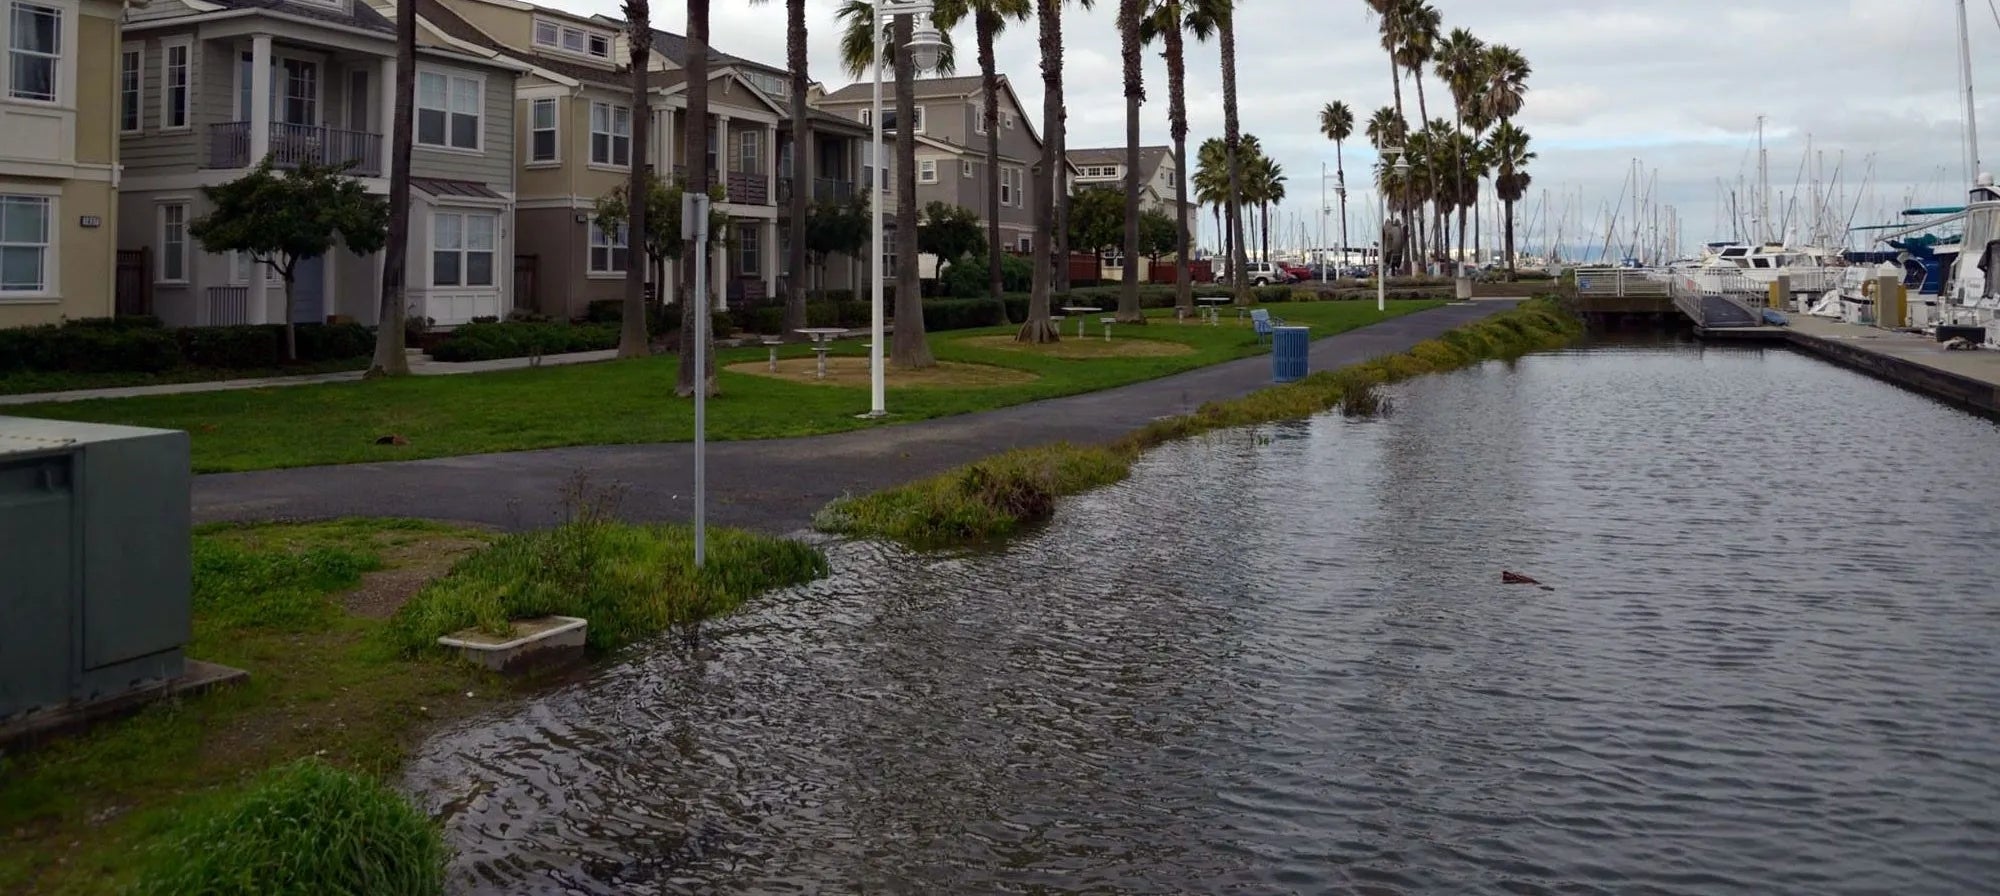 The footpath in front of the new condo construction on the Grand Marina in Alameda. The condos have raised steps up to their front doors (about 1 foot high), but during a high tide with storm surges water will reach the front doors.